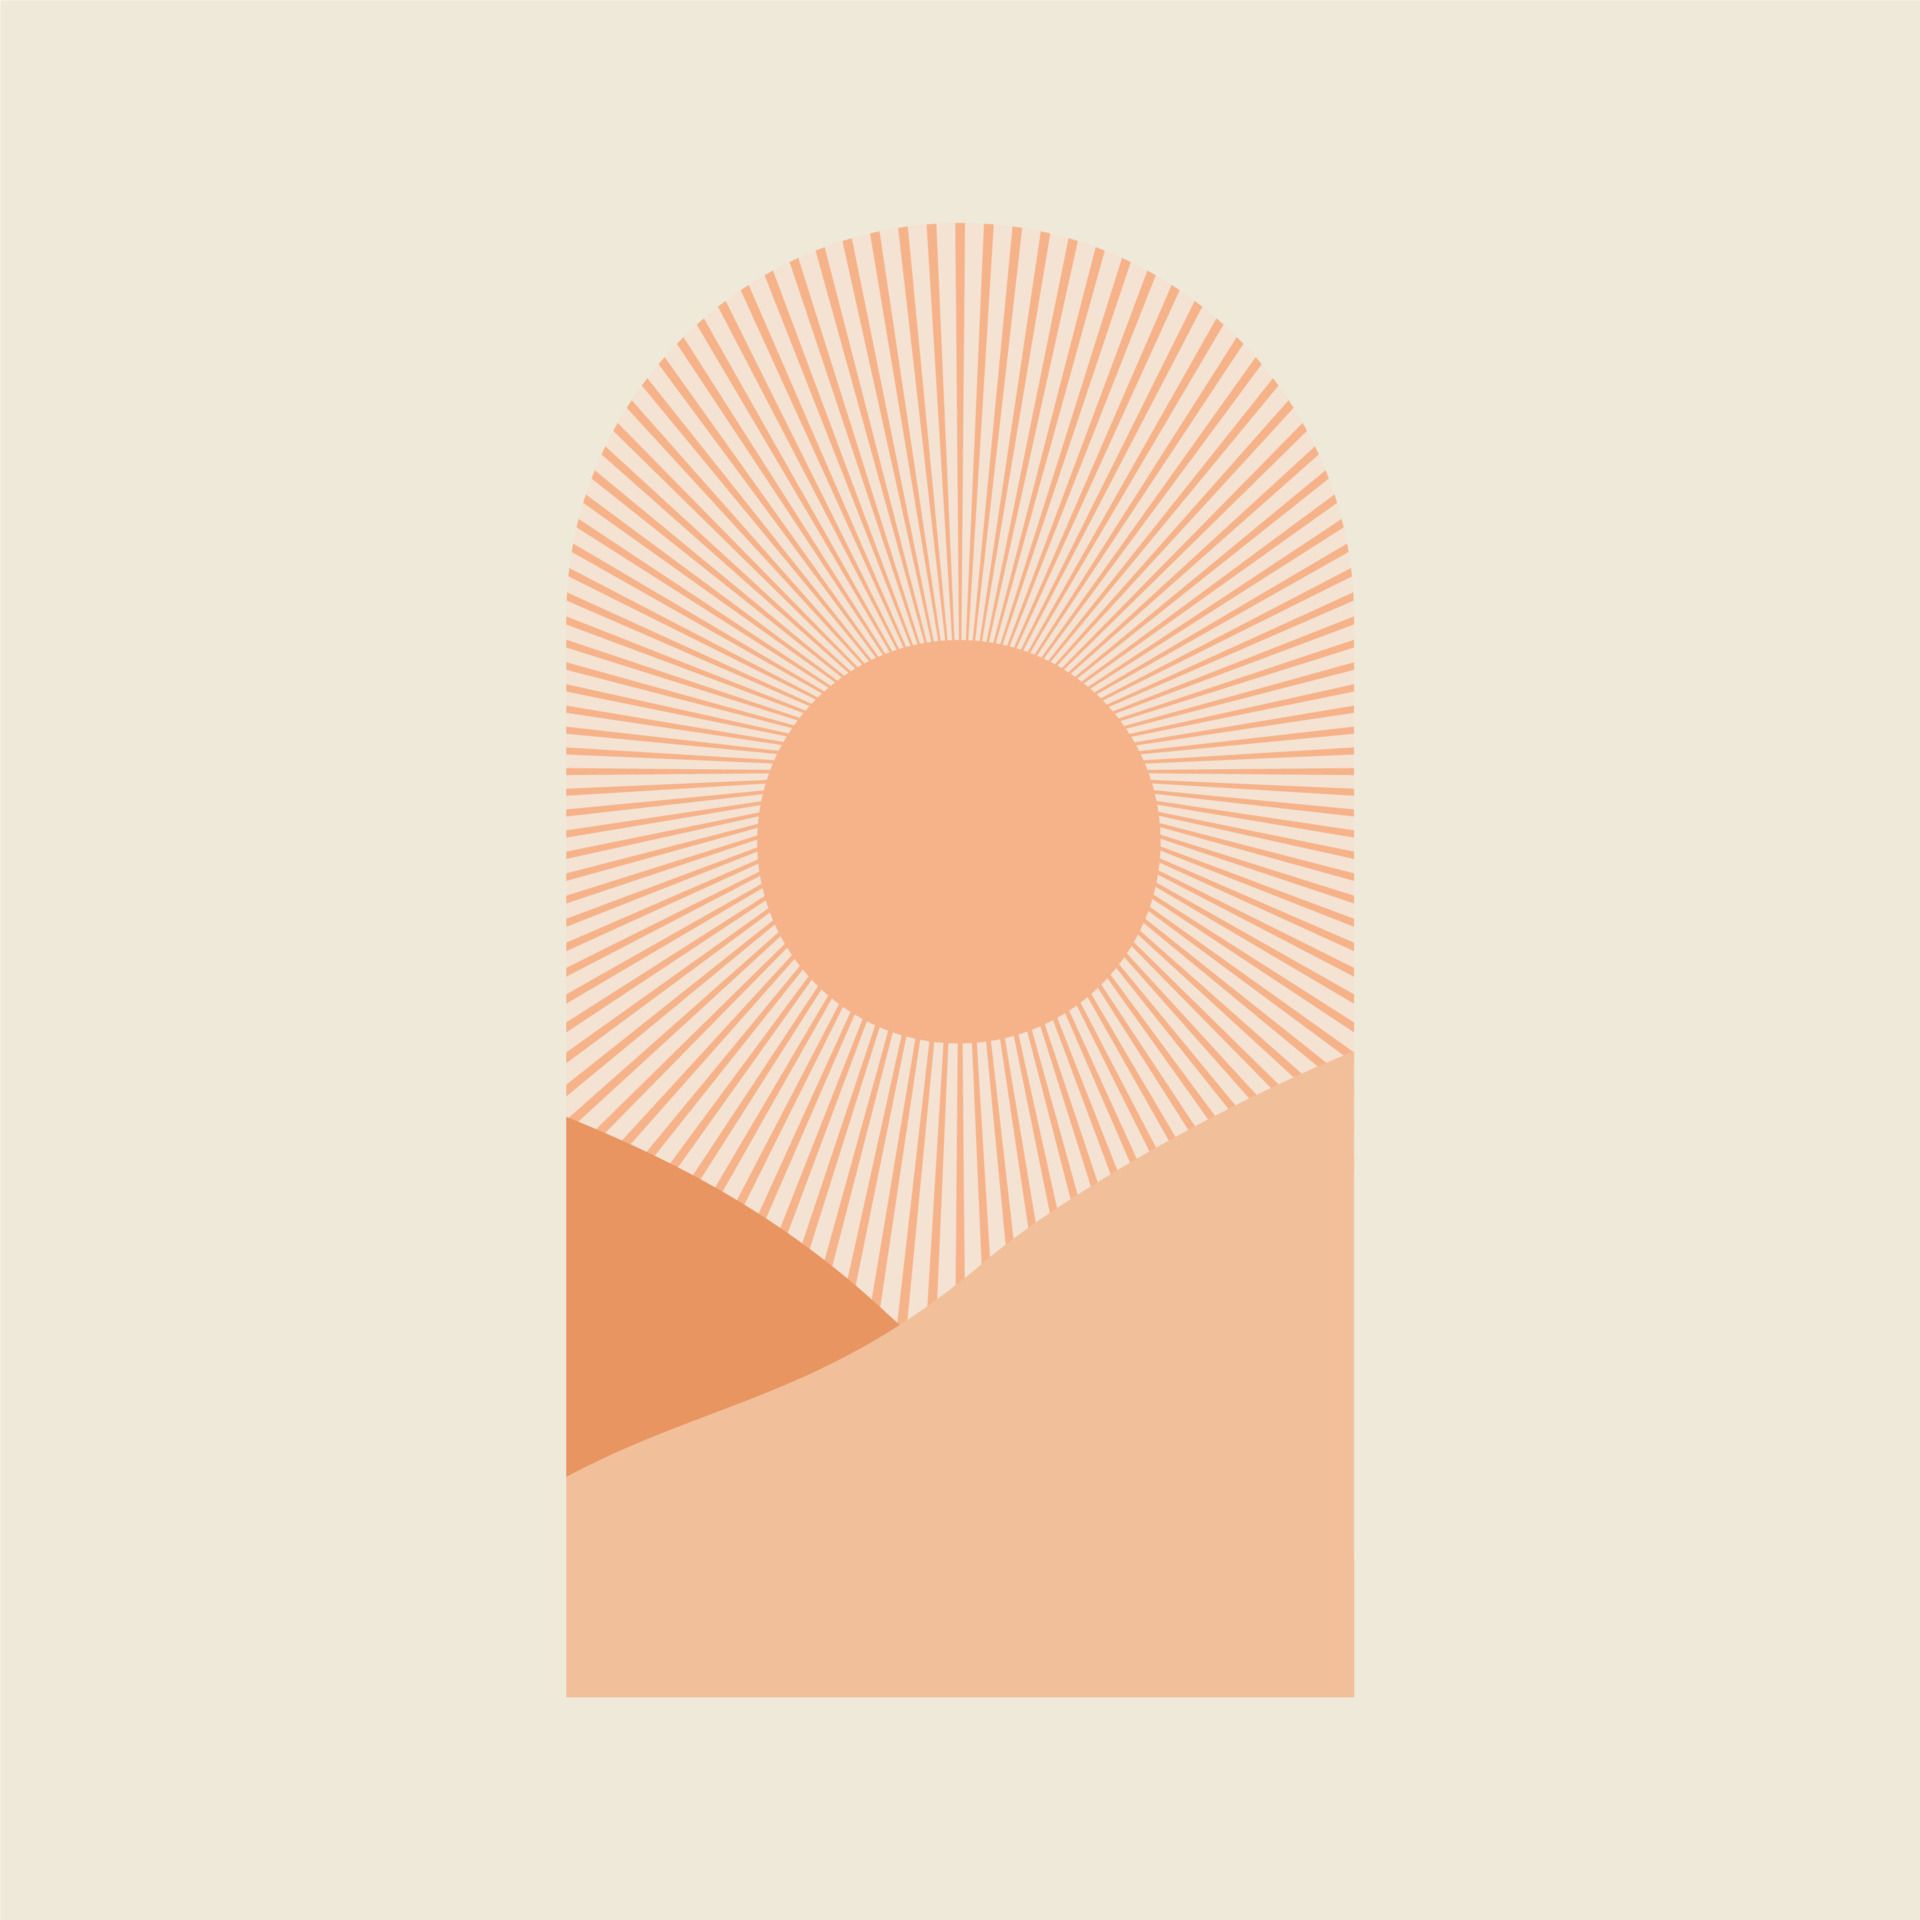 A sunset in the desert with an orange and yellow background - Terracotta